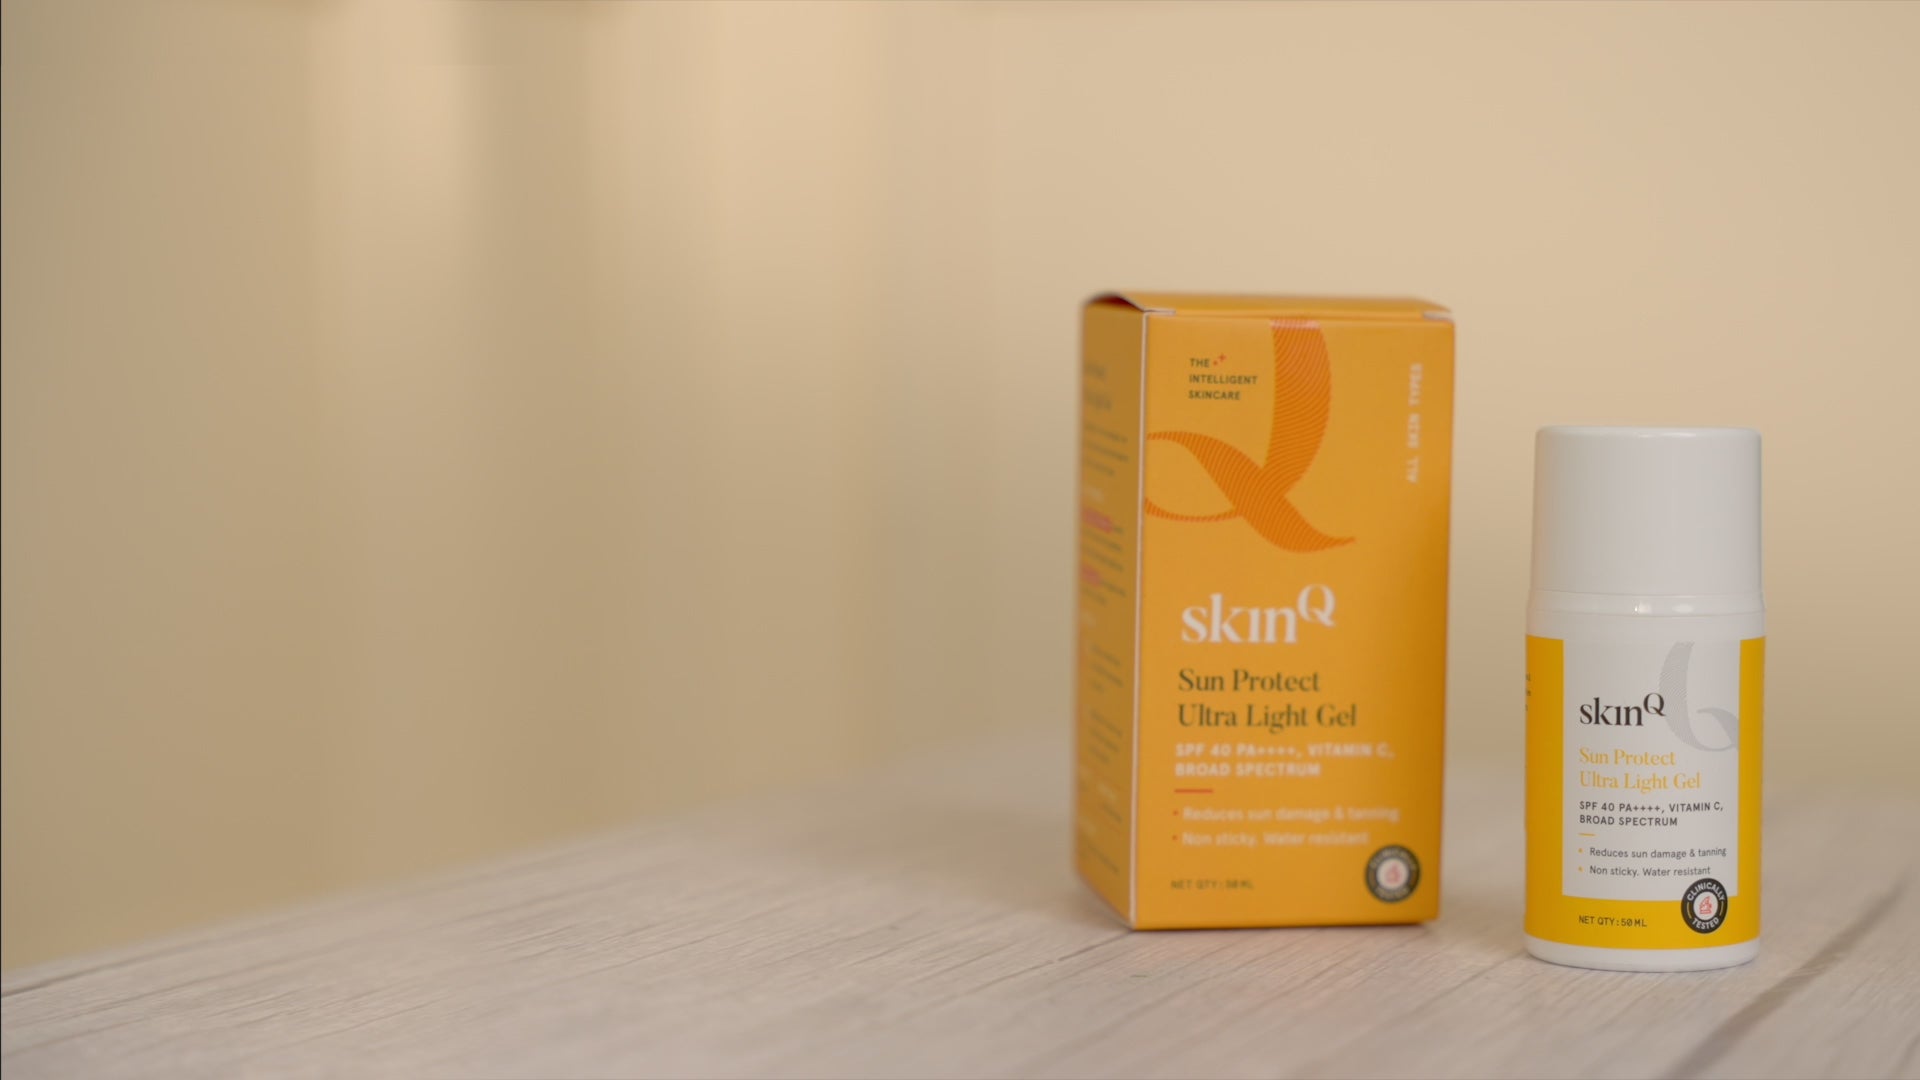 Load video: SkinQ Certified Sunscreen Gel - Gentle Formula for Daily Sun Protection